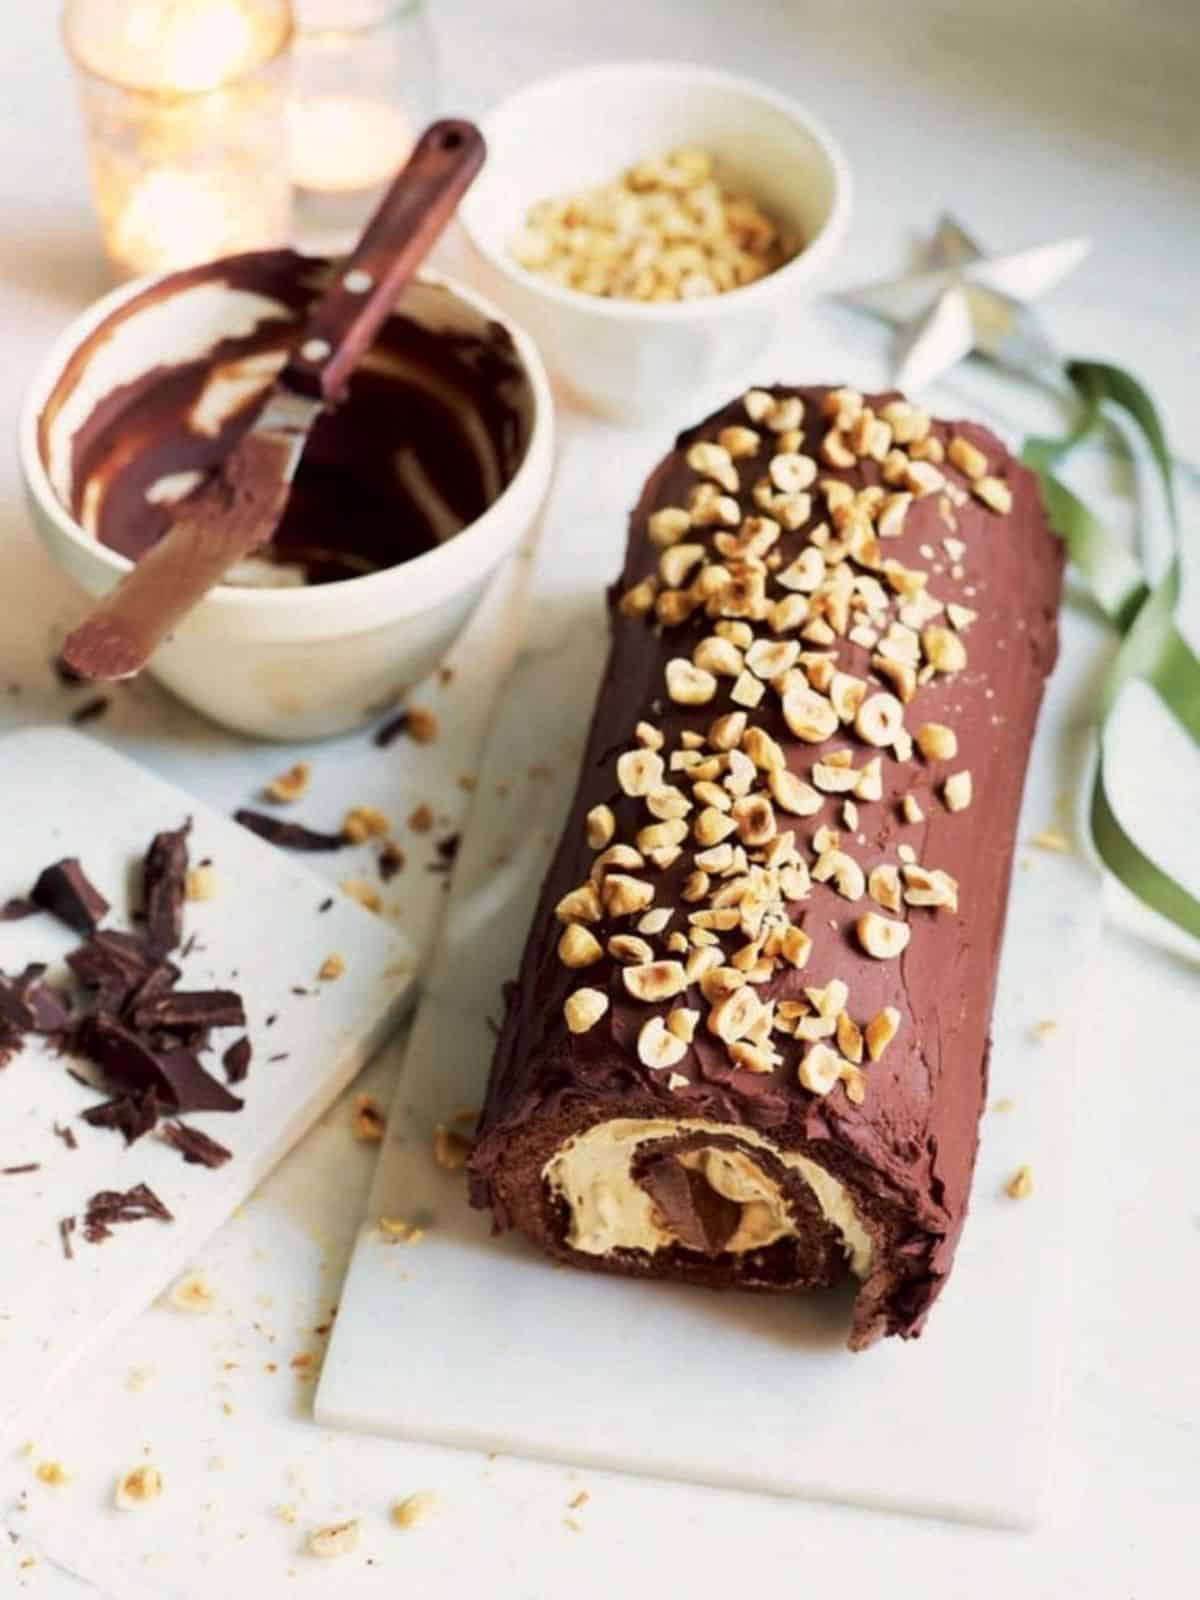 Scrumptious salted caramel swiss roll on a white tray.